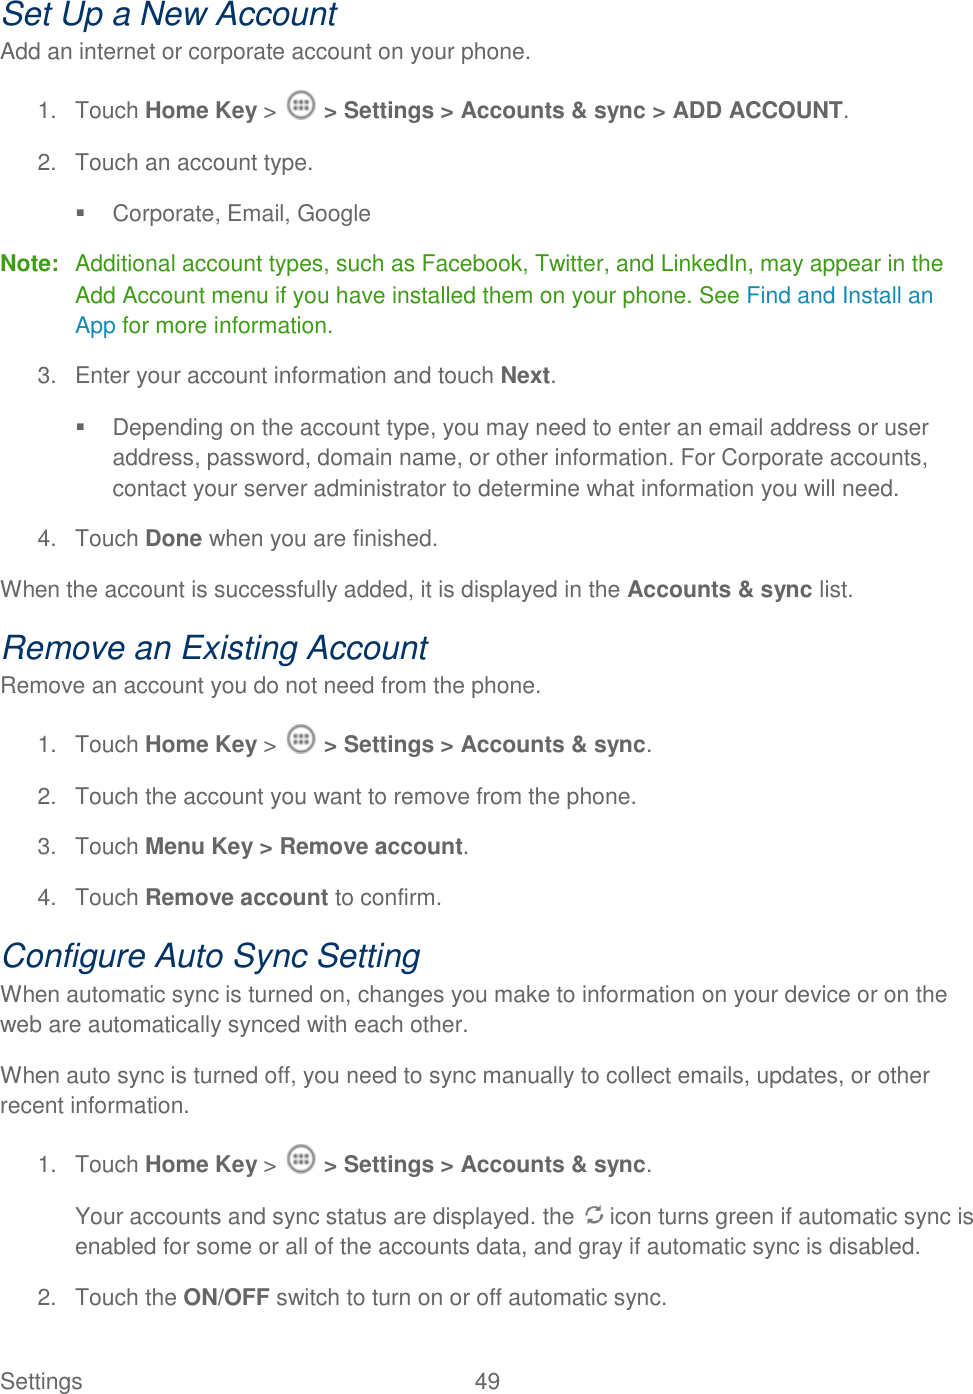 Settings    49 Set Up a New Account Add an internet or corporate account on your phone. 1.  Touch Home Key &gt;   &gt; Settings &gt; Accounts &amp; sync &gt; ADD ACCOUNT. 2.  Touch an account type.   Corporate, Email, Google Note:  Additional account types, such as Facebook, Twitter, and LinkedIn, may appear in the Add Account menu if you have installed them on your phone. See Find and Install an App for more information. 3.  Enter your account information and touch Next.   Depending on the account type, you may need to enter an email address or user address, password, domain name, or other information. For Corporate accounts, contact your server administrator to determine what information you will need. 4.  Touch Done when you are finished. When the account is successfully added, it is displayed in the Accounts &amp; sync list. Remove an Existing Account Remove an account you do not need from the phone. 1.  Touch Home Key &gt;   &gt; Settings &gt; Accounts &amp; sync. 2.  Touch the account you want to remove from the phone. 3.  Touch Menu Key &gt; Remove account. 4.  Touch Remove account to confirm. Configure Auto Sync Setting When automatic sync is turned on, changes you make to information on your device or on the web are automatically synced with each other. When auto sync is turned off, you need to sync manually to collect emails, updates, or other recent information. 1.  Touch Home Key &gt;   &gt; Settings &gt; Accounts &amp; sync. Your accounts and sync status are displayed. the   icon turns green if automatic sync is enabled for some or all of the accounts data, and gray if automatic sync is disabled. 2.  Touch the ON/OFF switch to turn on or off automatic sync.  